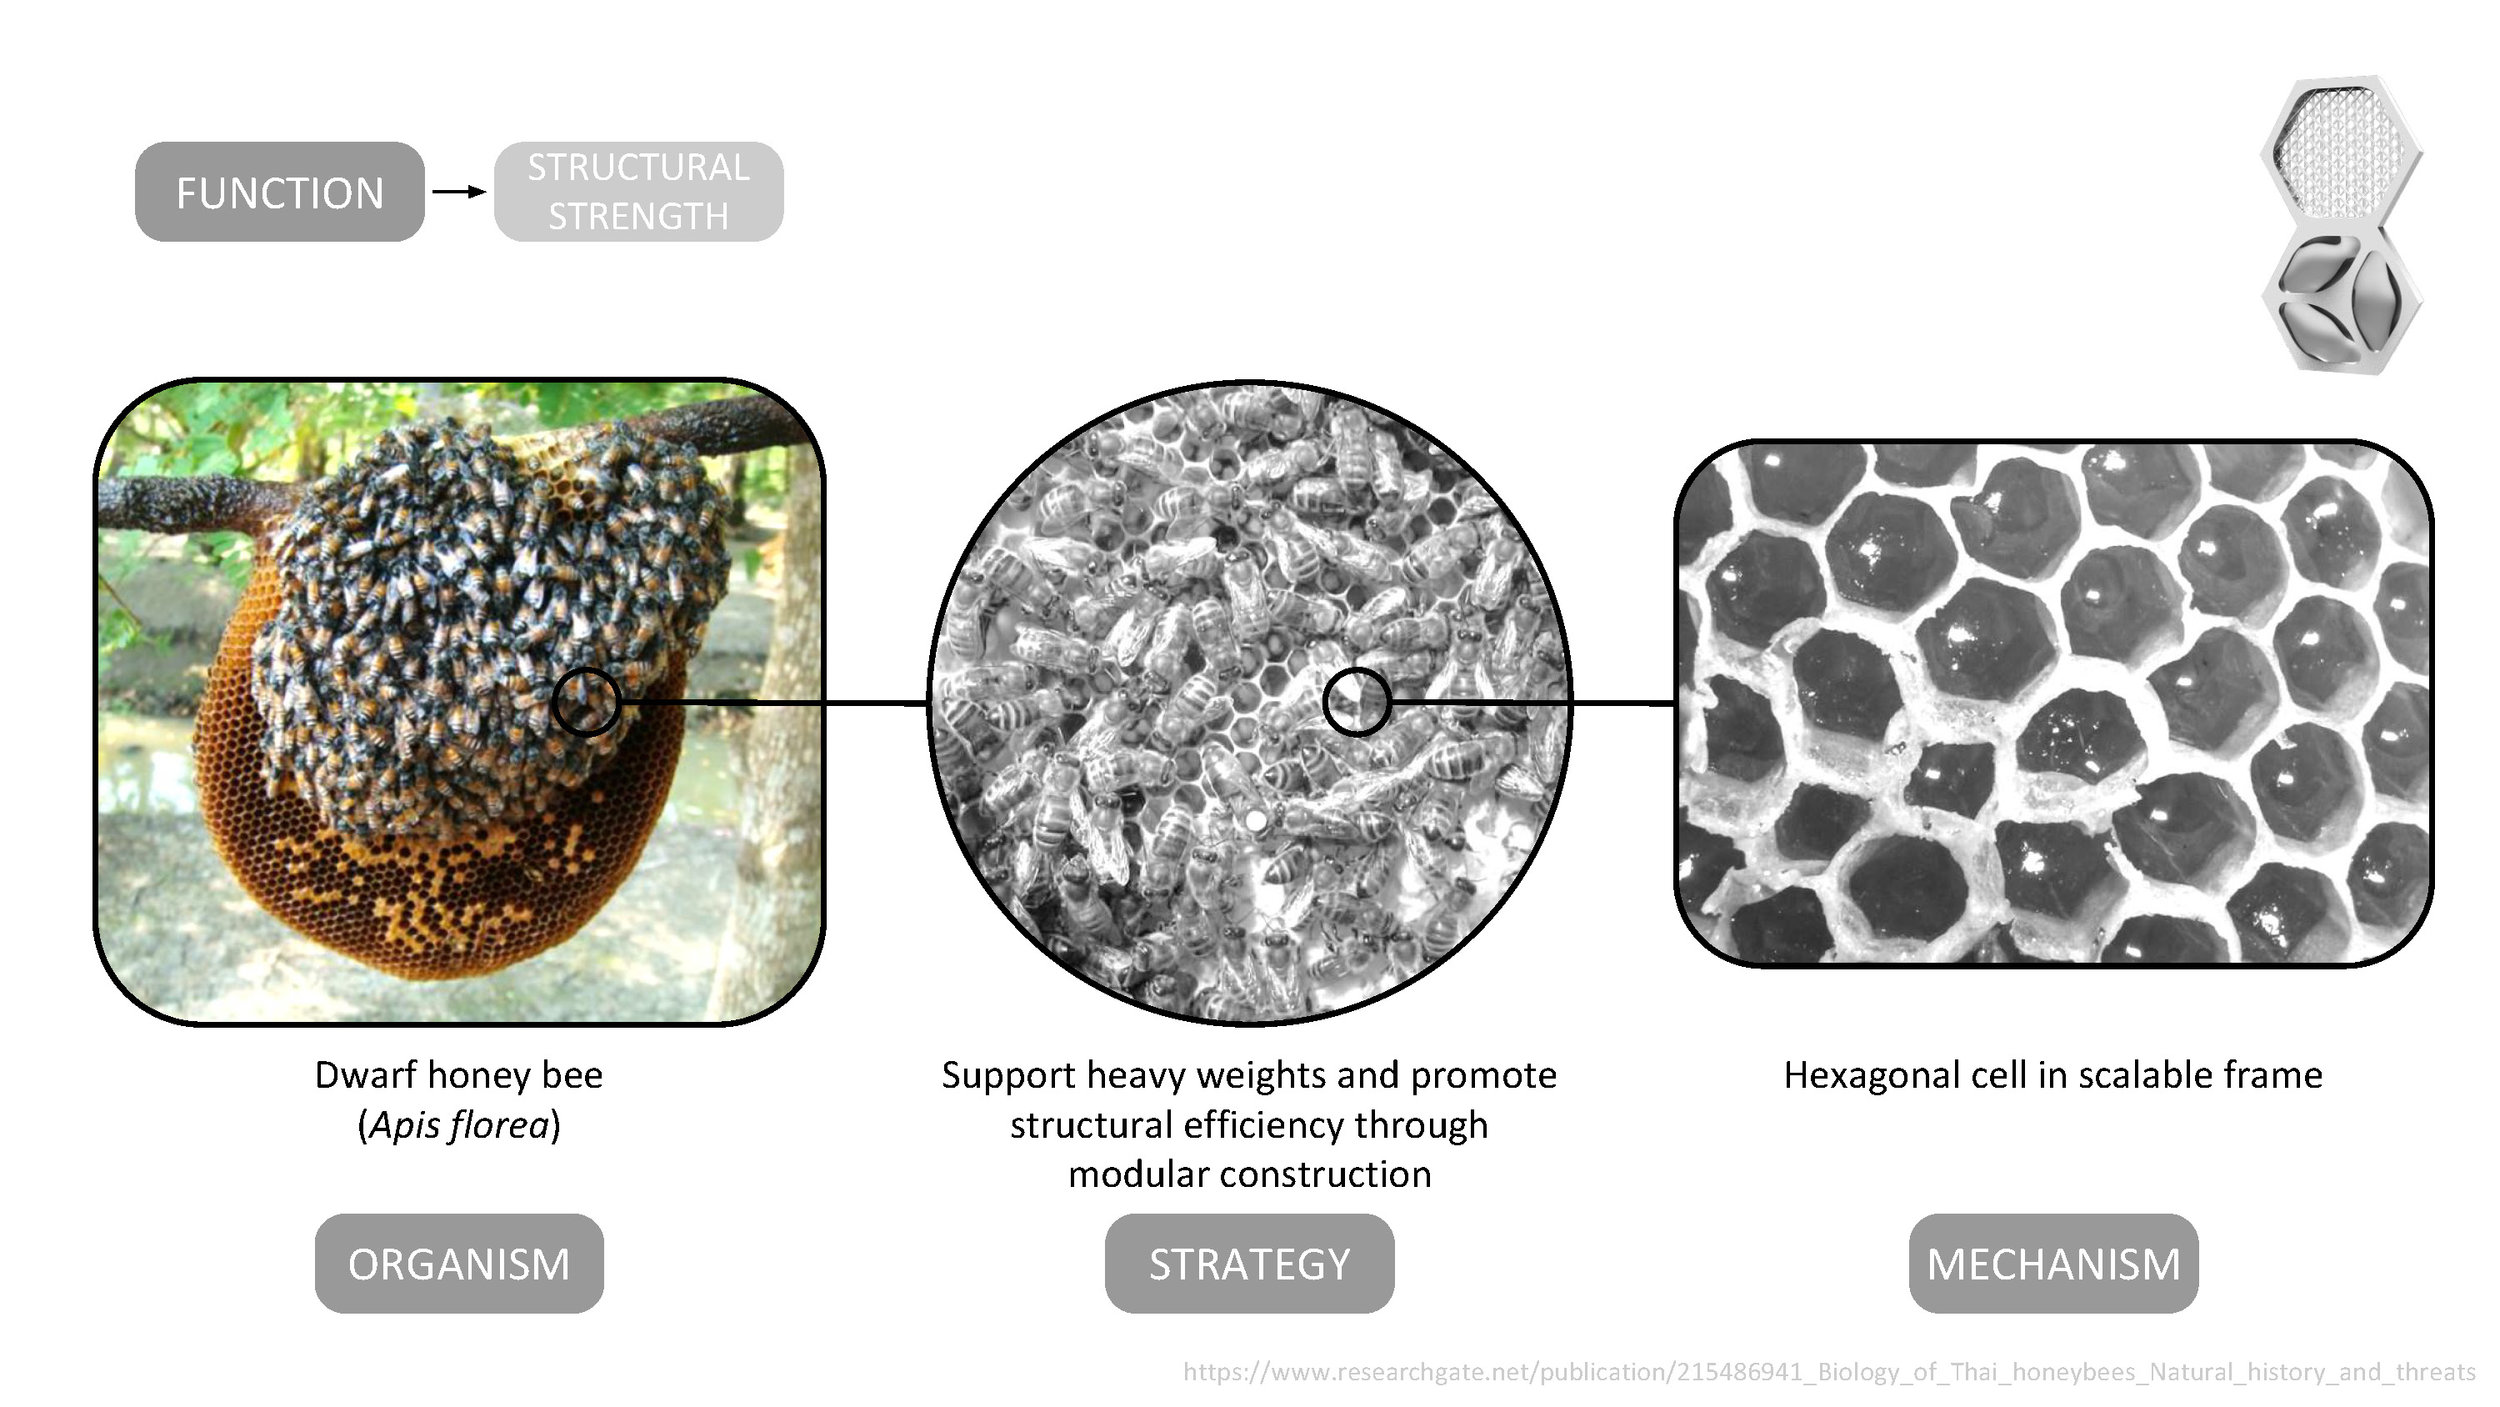  The AquaWeb emulates the hexagonal nest cell structure of the dwarf honey bee ( Apis florea ) to increase the strength of the modular system and reduce the amount of material needed to produce a robust and efficient structure. 